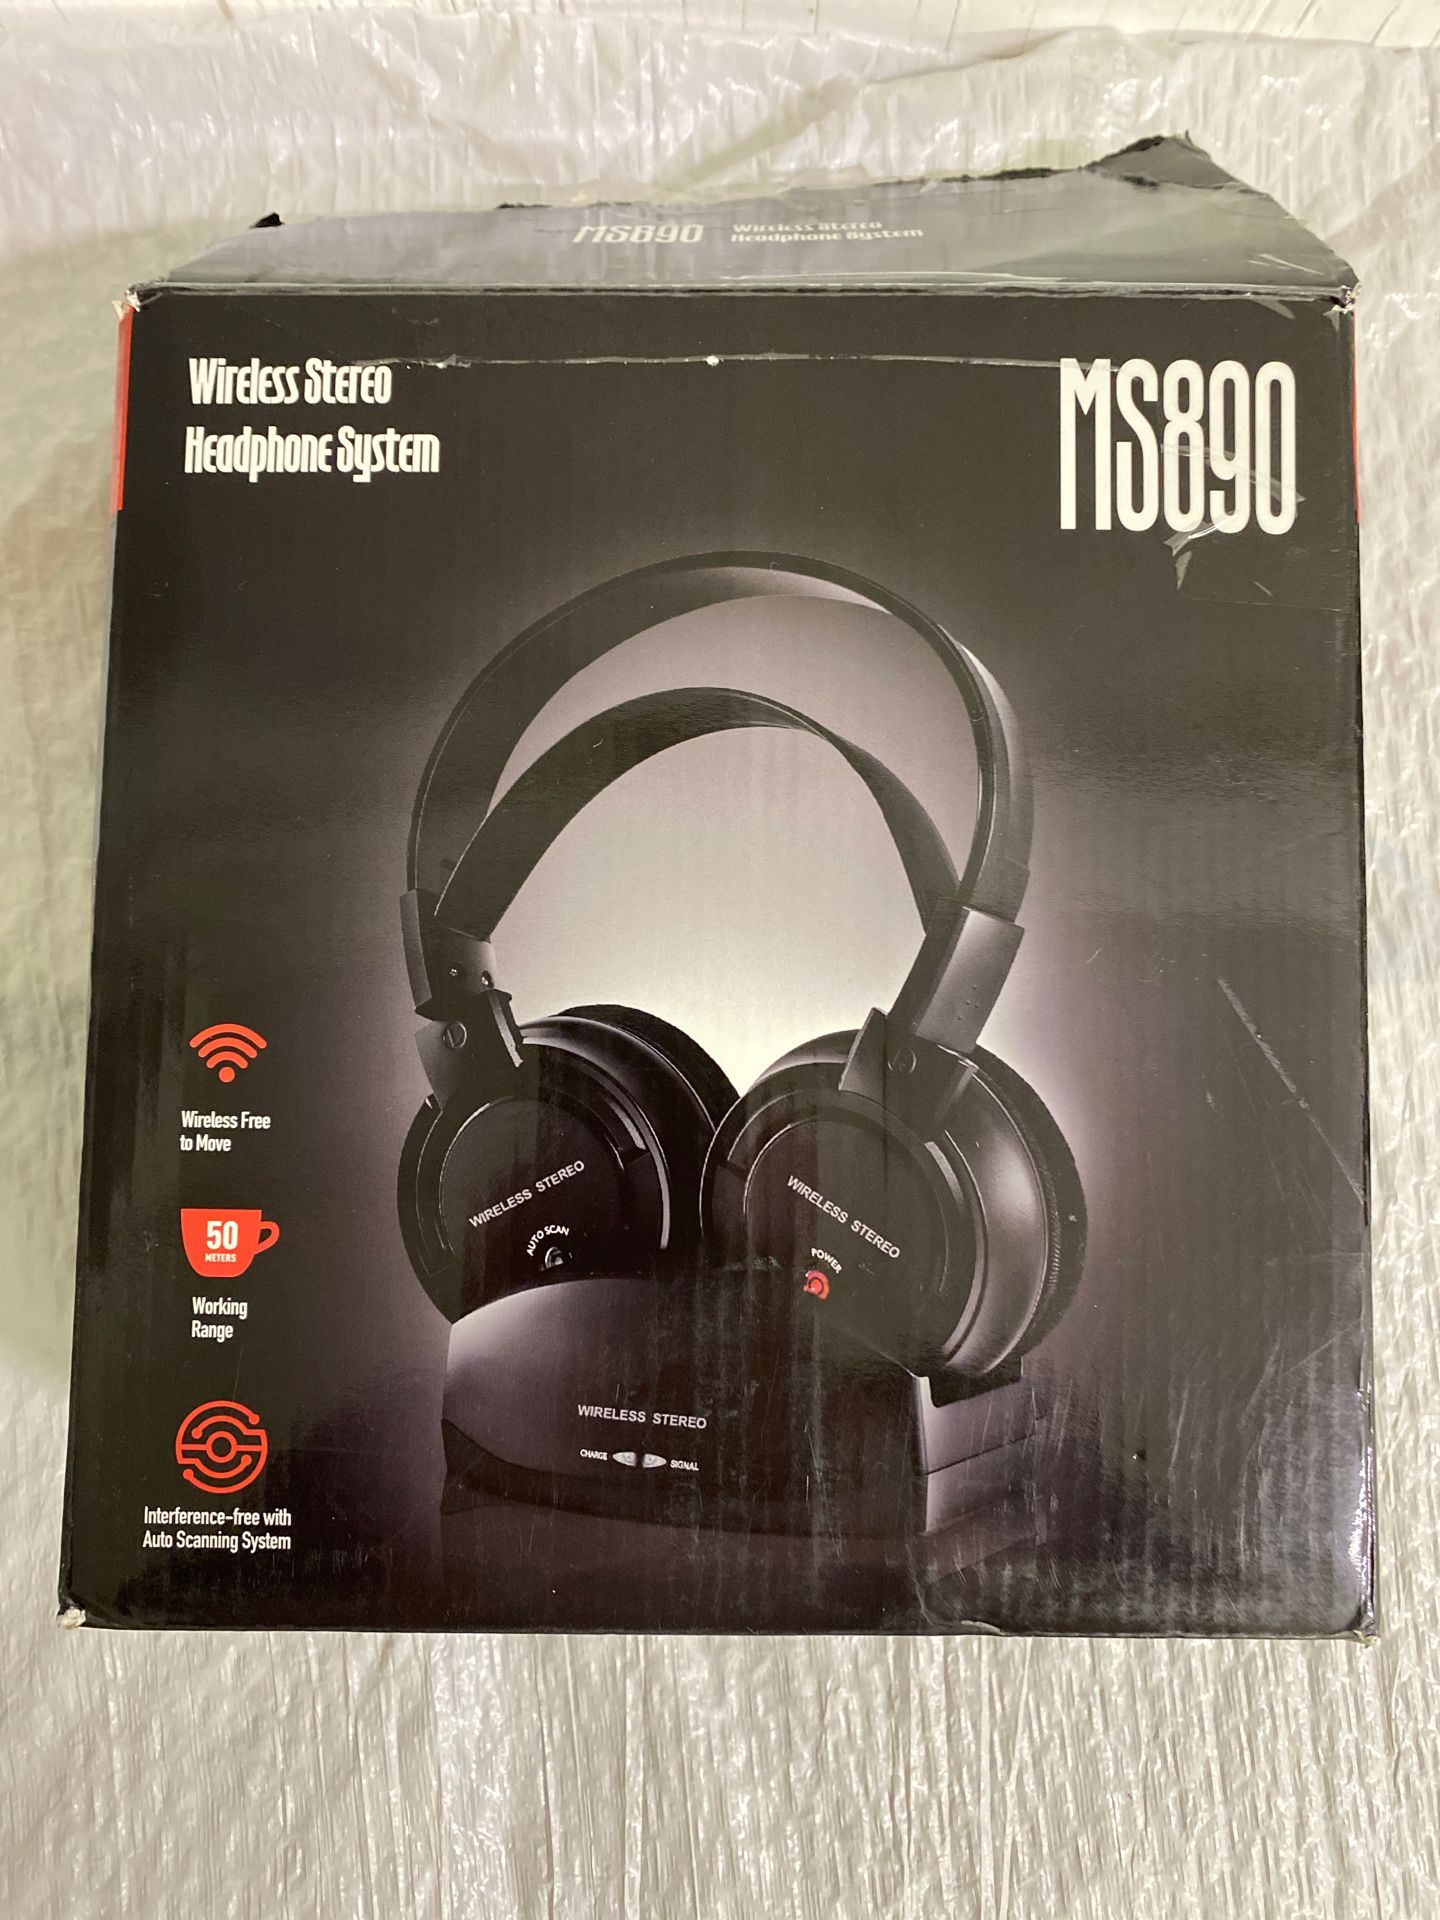 MS890 Wireless Stereo Headphone System